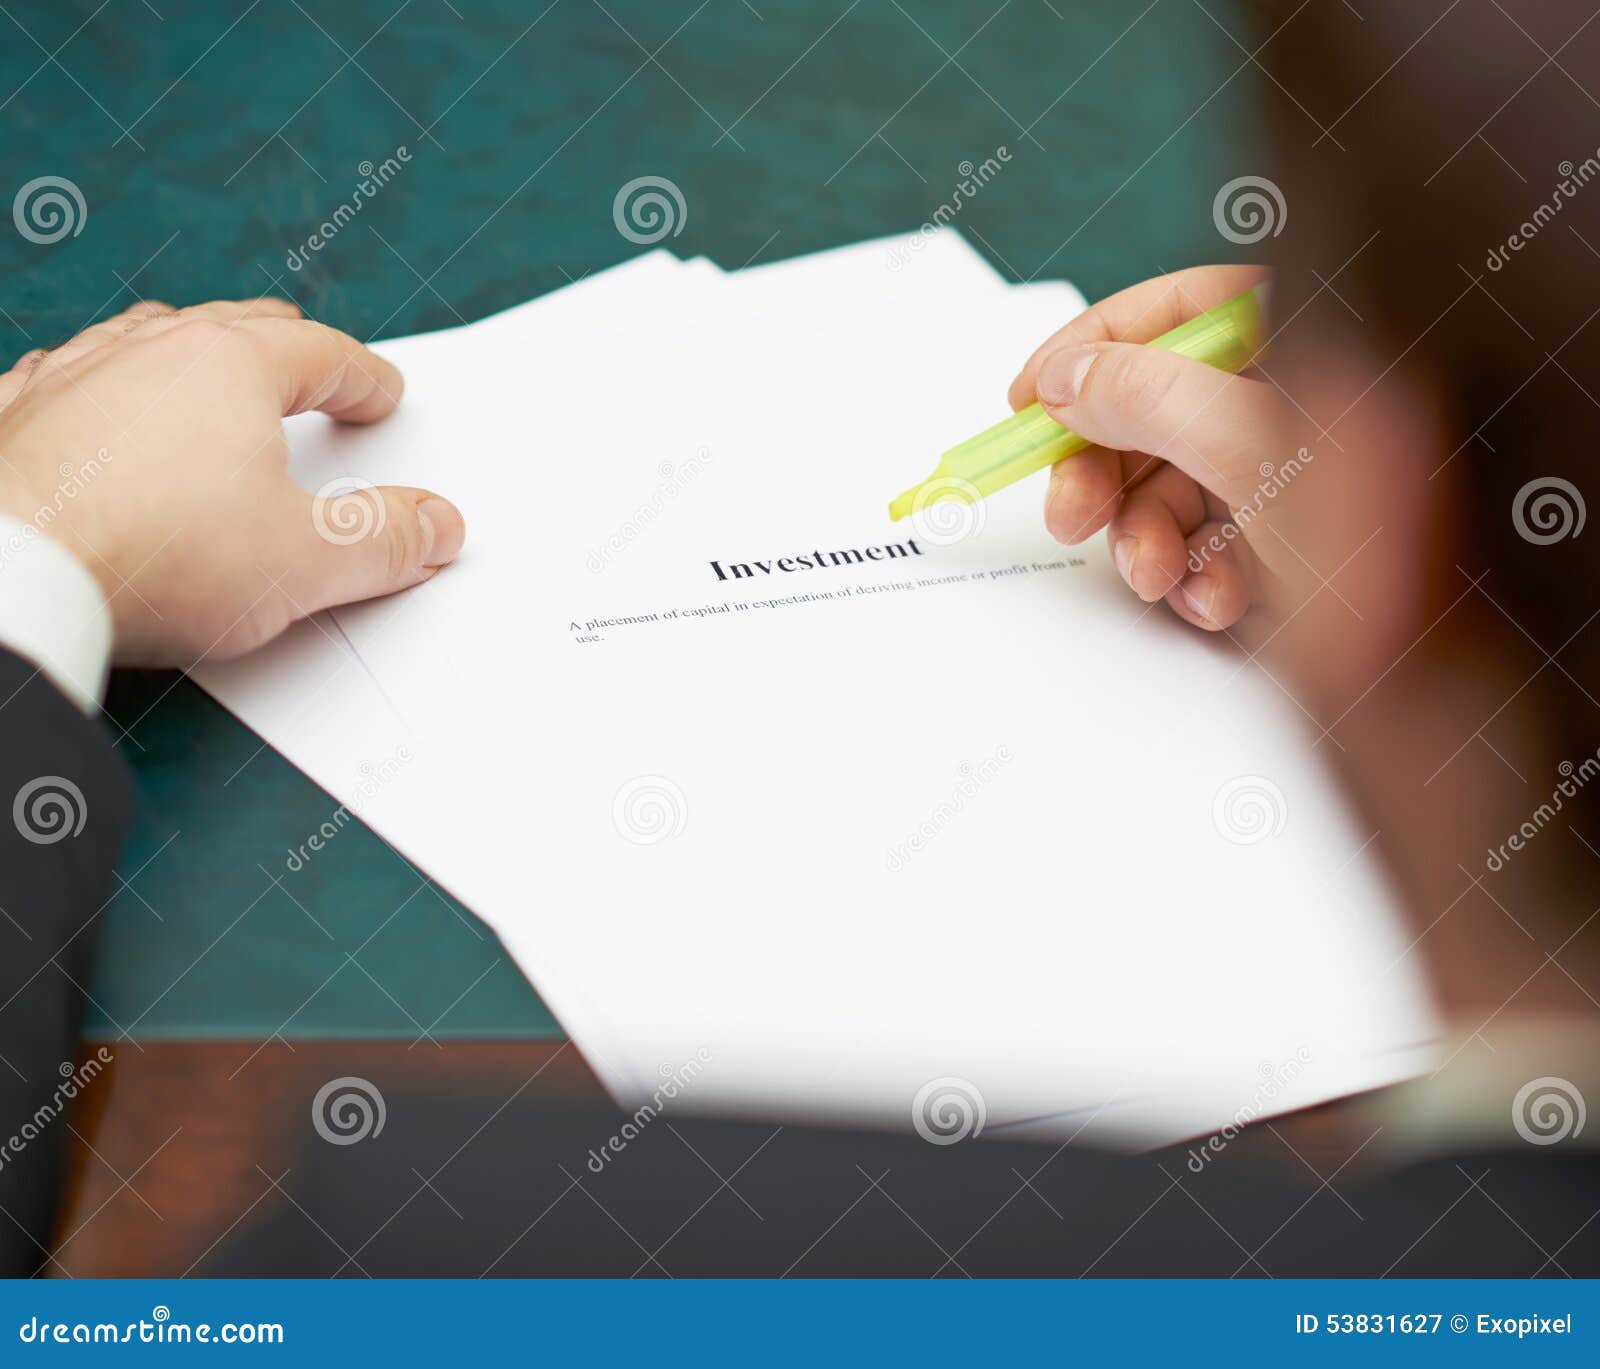 Marking Words In A Investment Definition Stock Image - Image of ...